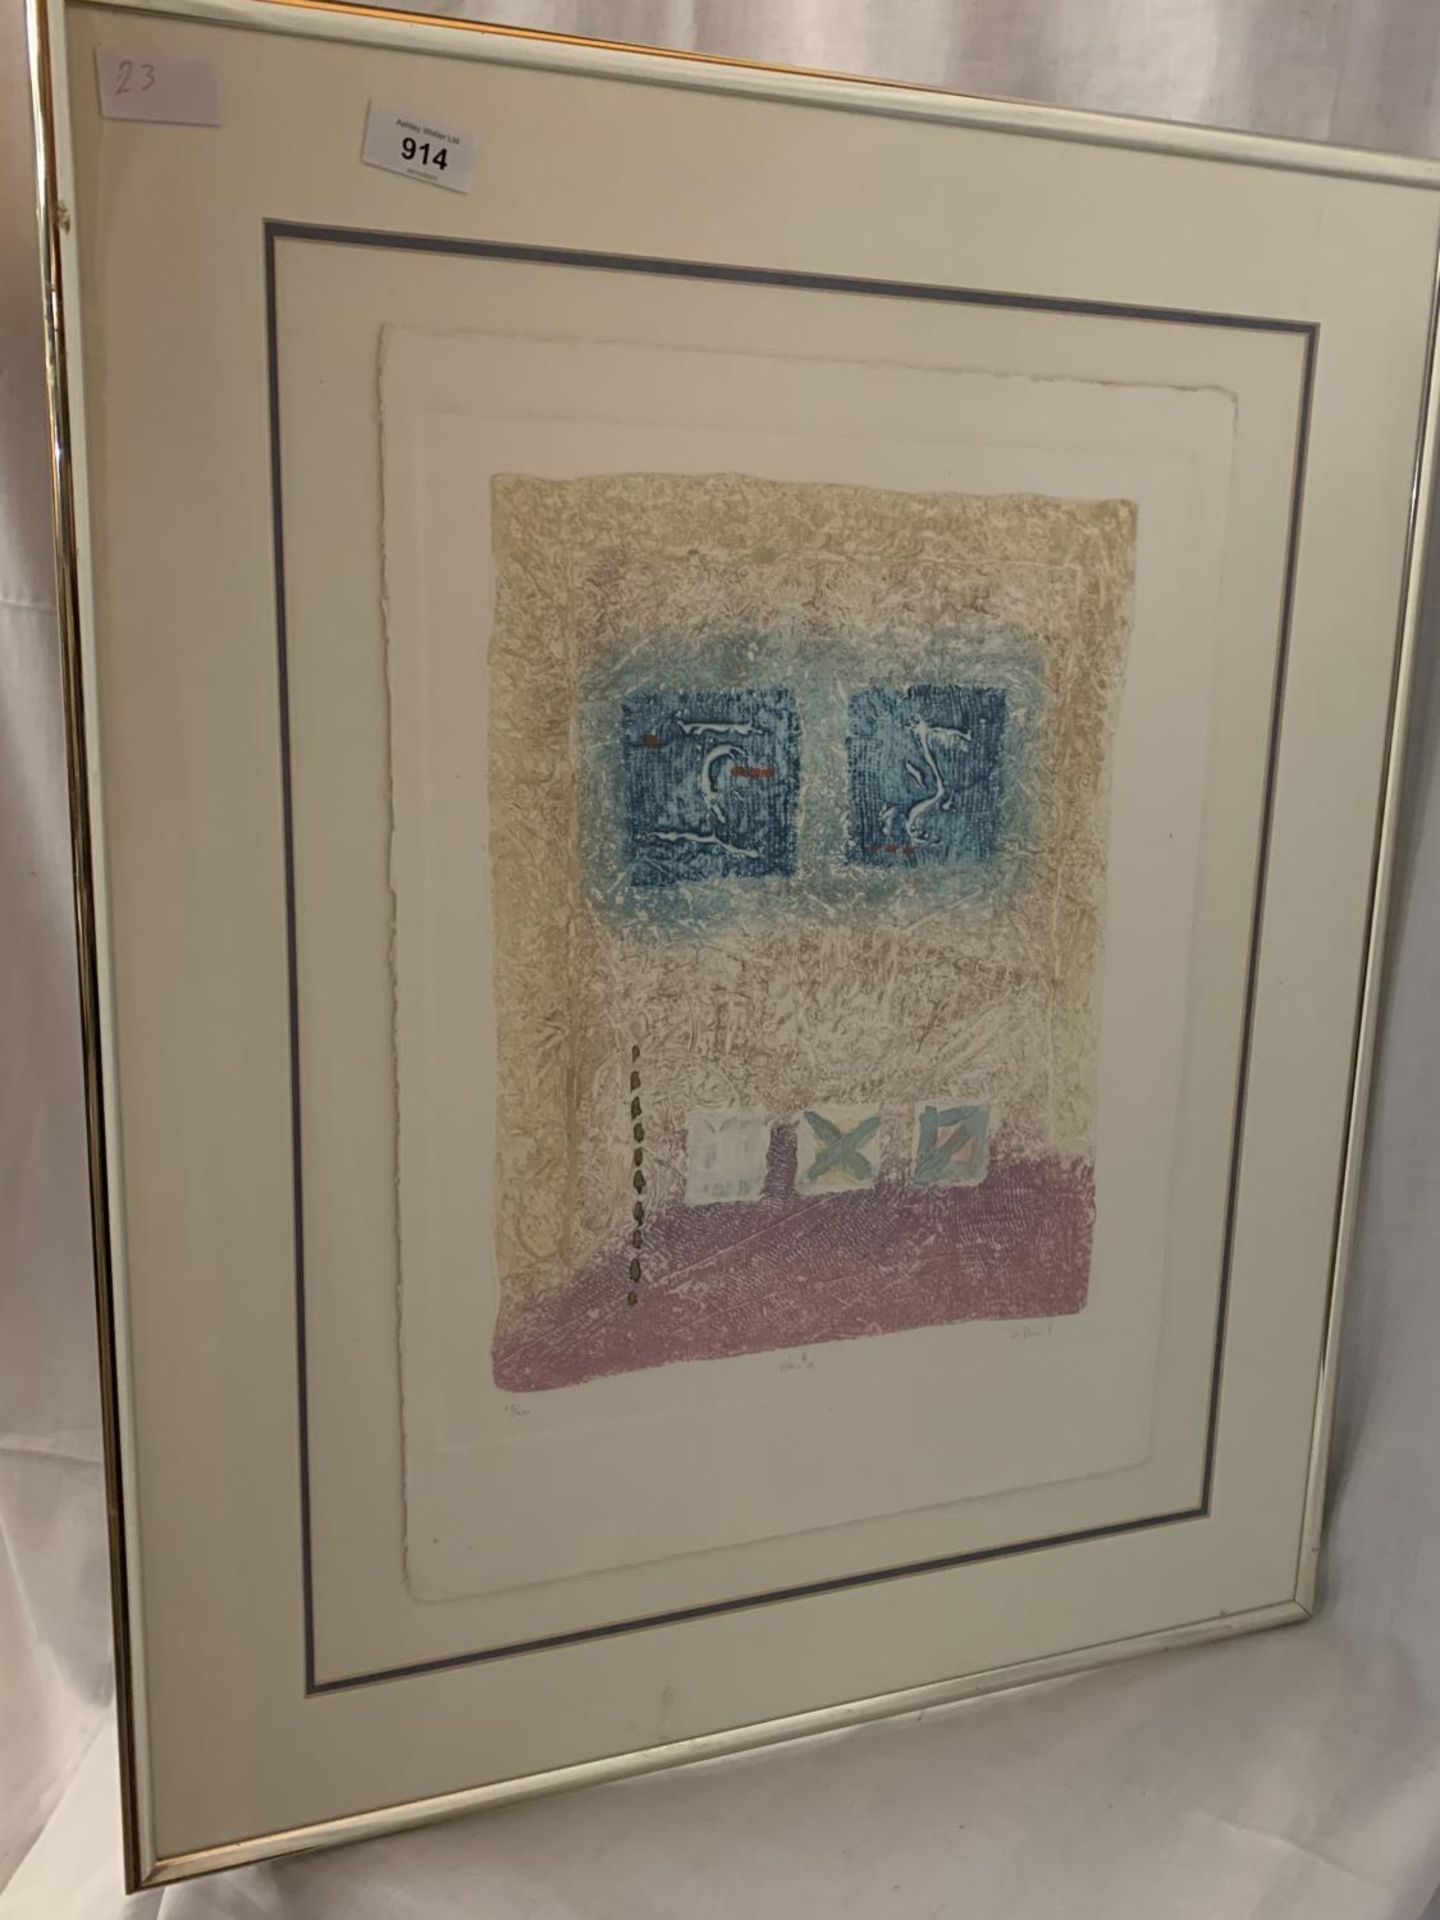 A CHROME FRAMED PIECE ON TEXTURED PAPER MOUNTED